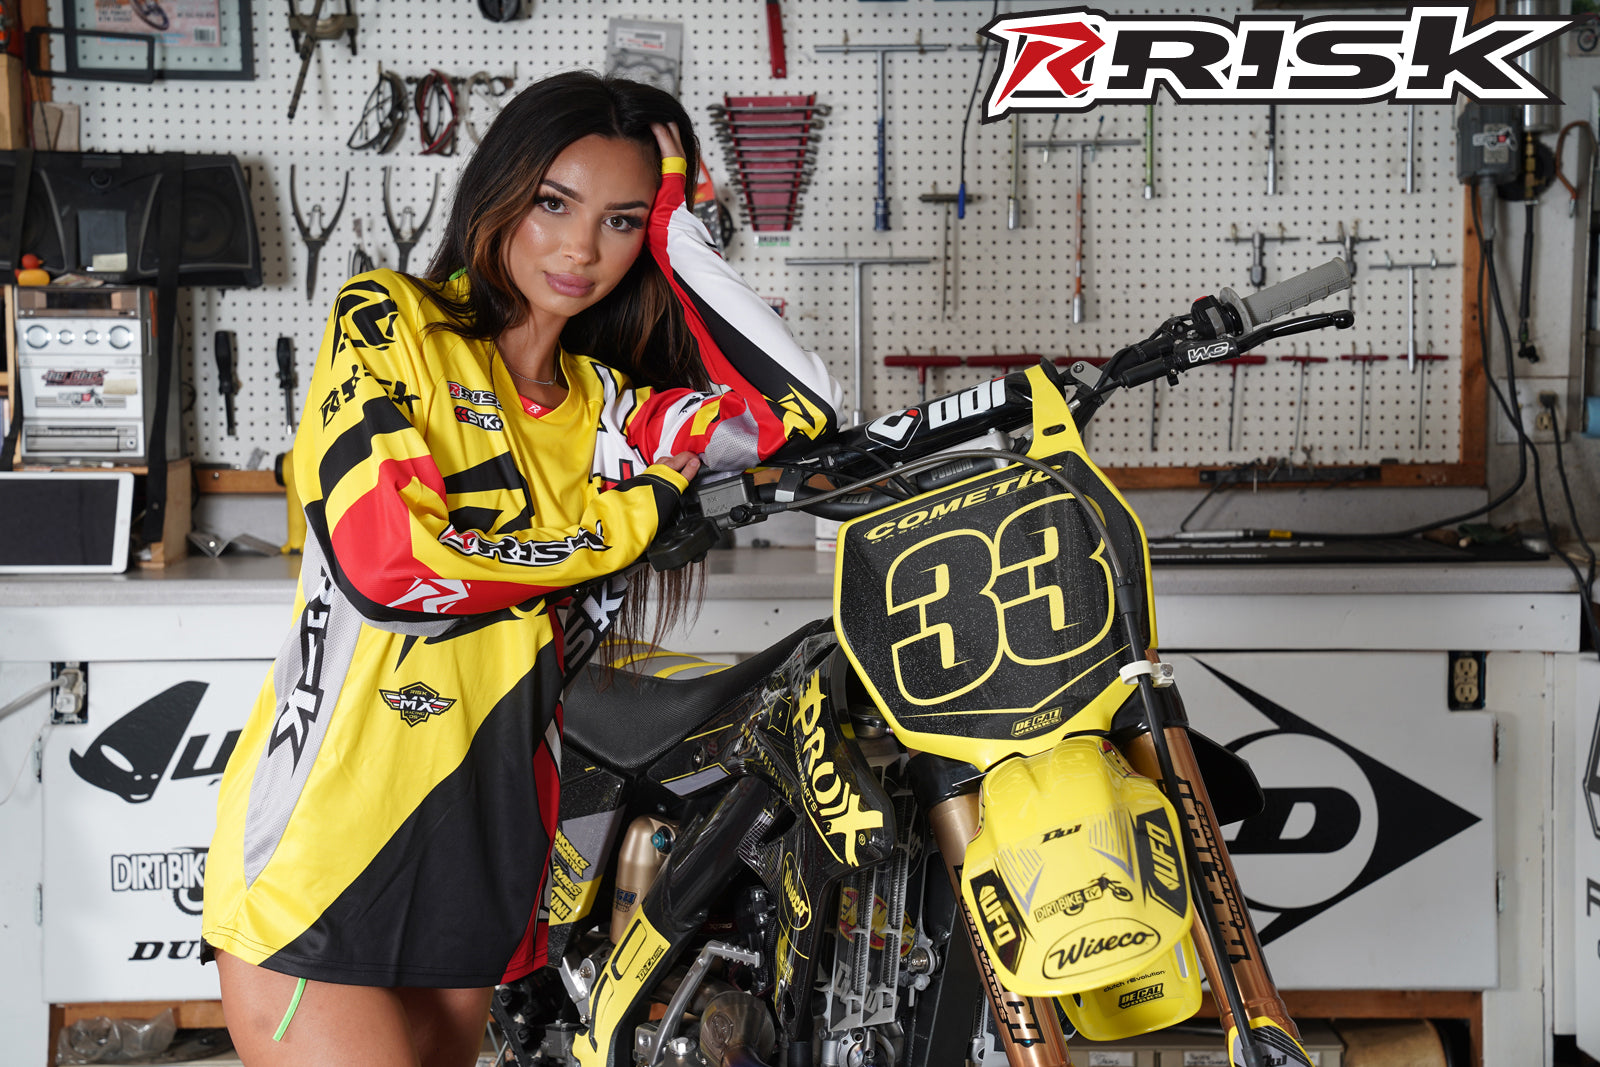 August's Risk Racing Moto Model Samantha Heady posing in various bikinis & Risk Racing Jerseys next to a dirt bike that's sitting on a Risk Racing ATS stand - Pose #26